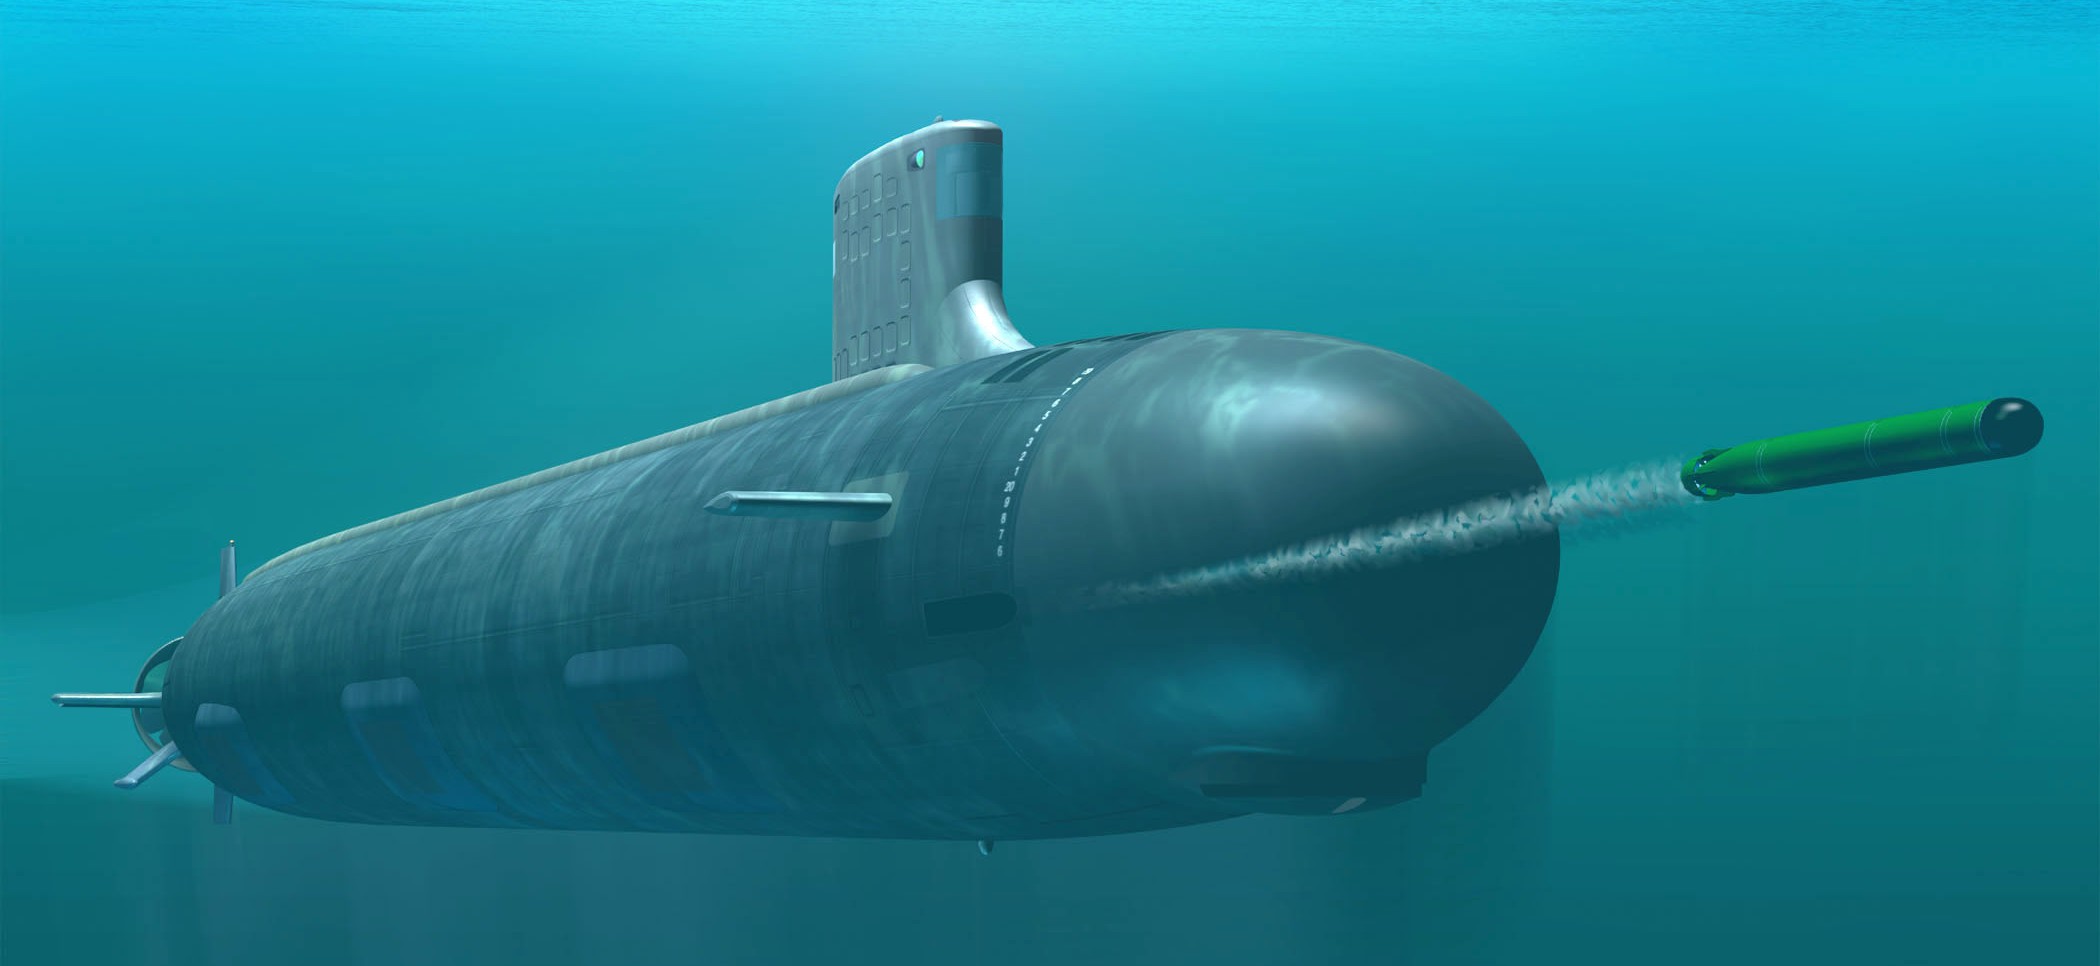 Das Boom: 6 best weapons designed to kill submarines